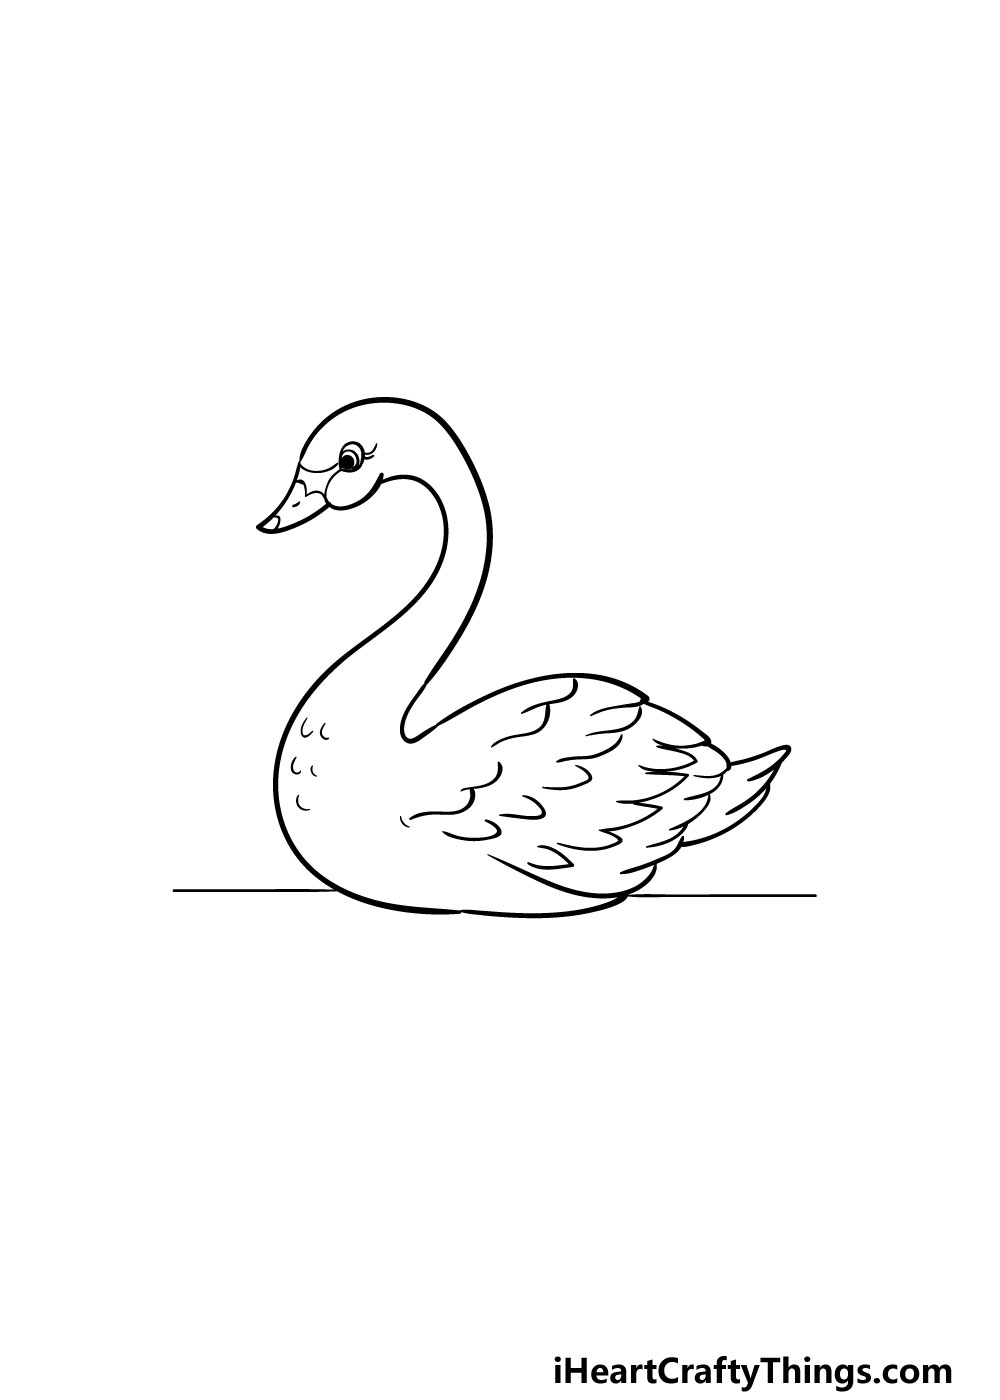 drawing a swan step 5